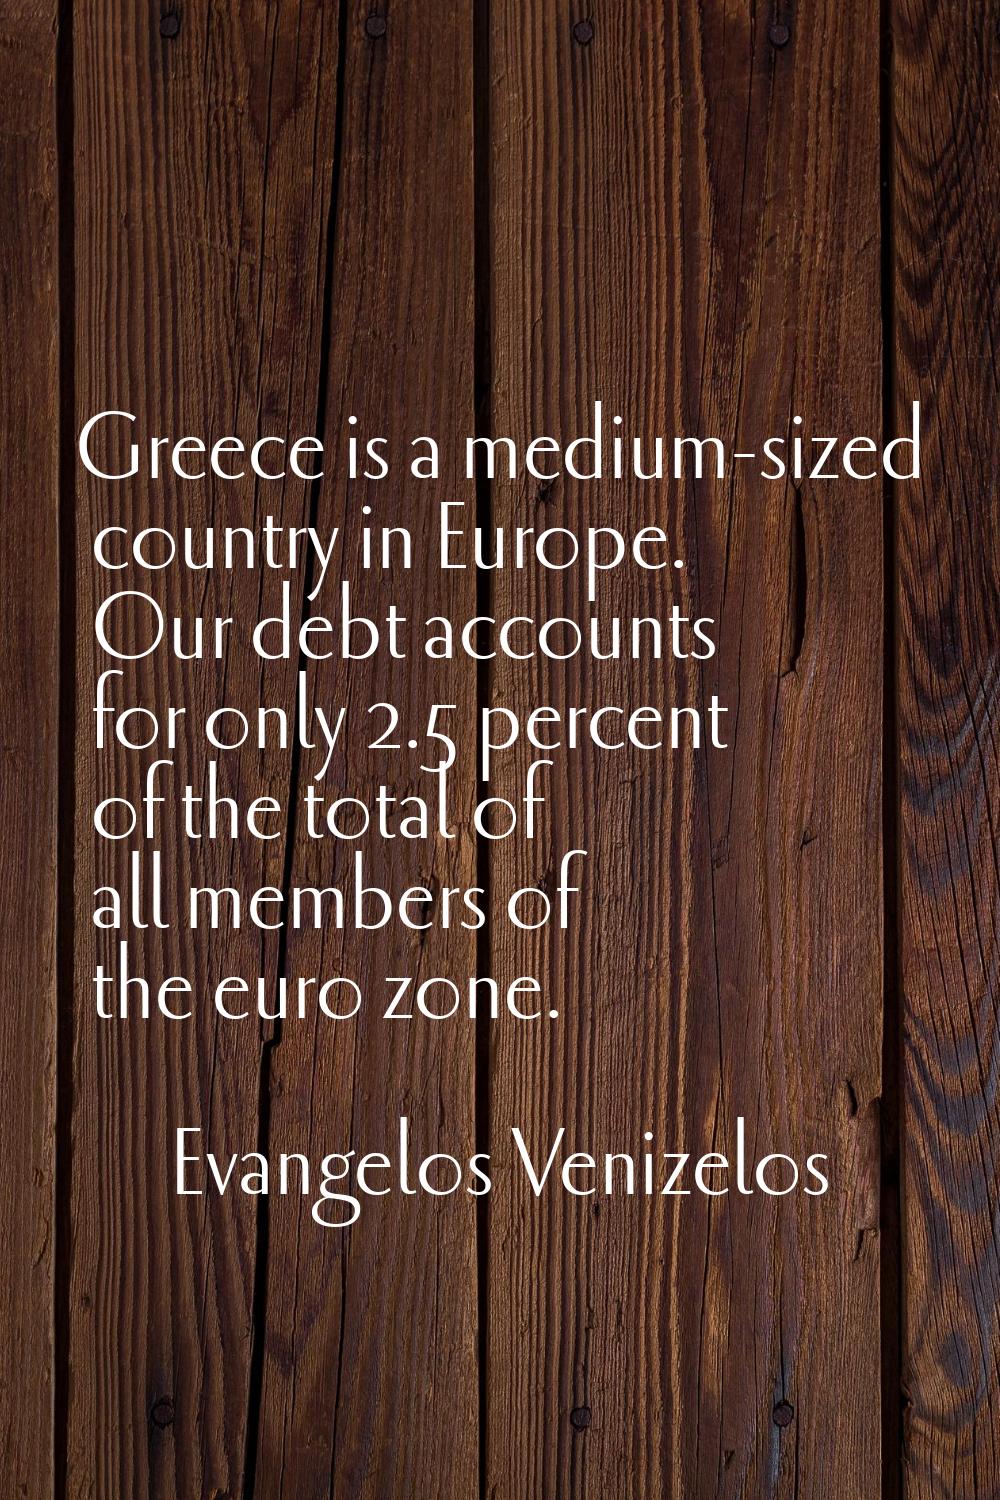 Greece is a medium-sized country in Europe. Our debt accounts for only 2.5 percent of the total of 